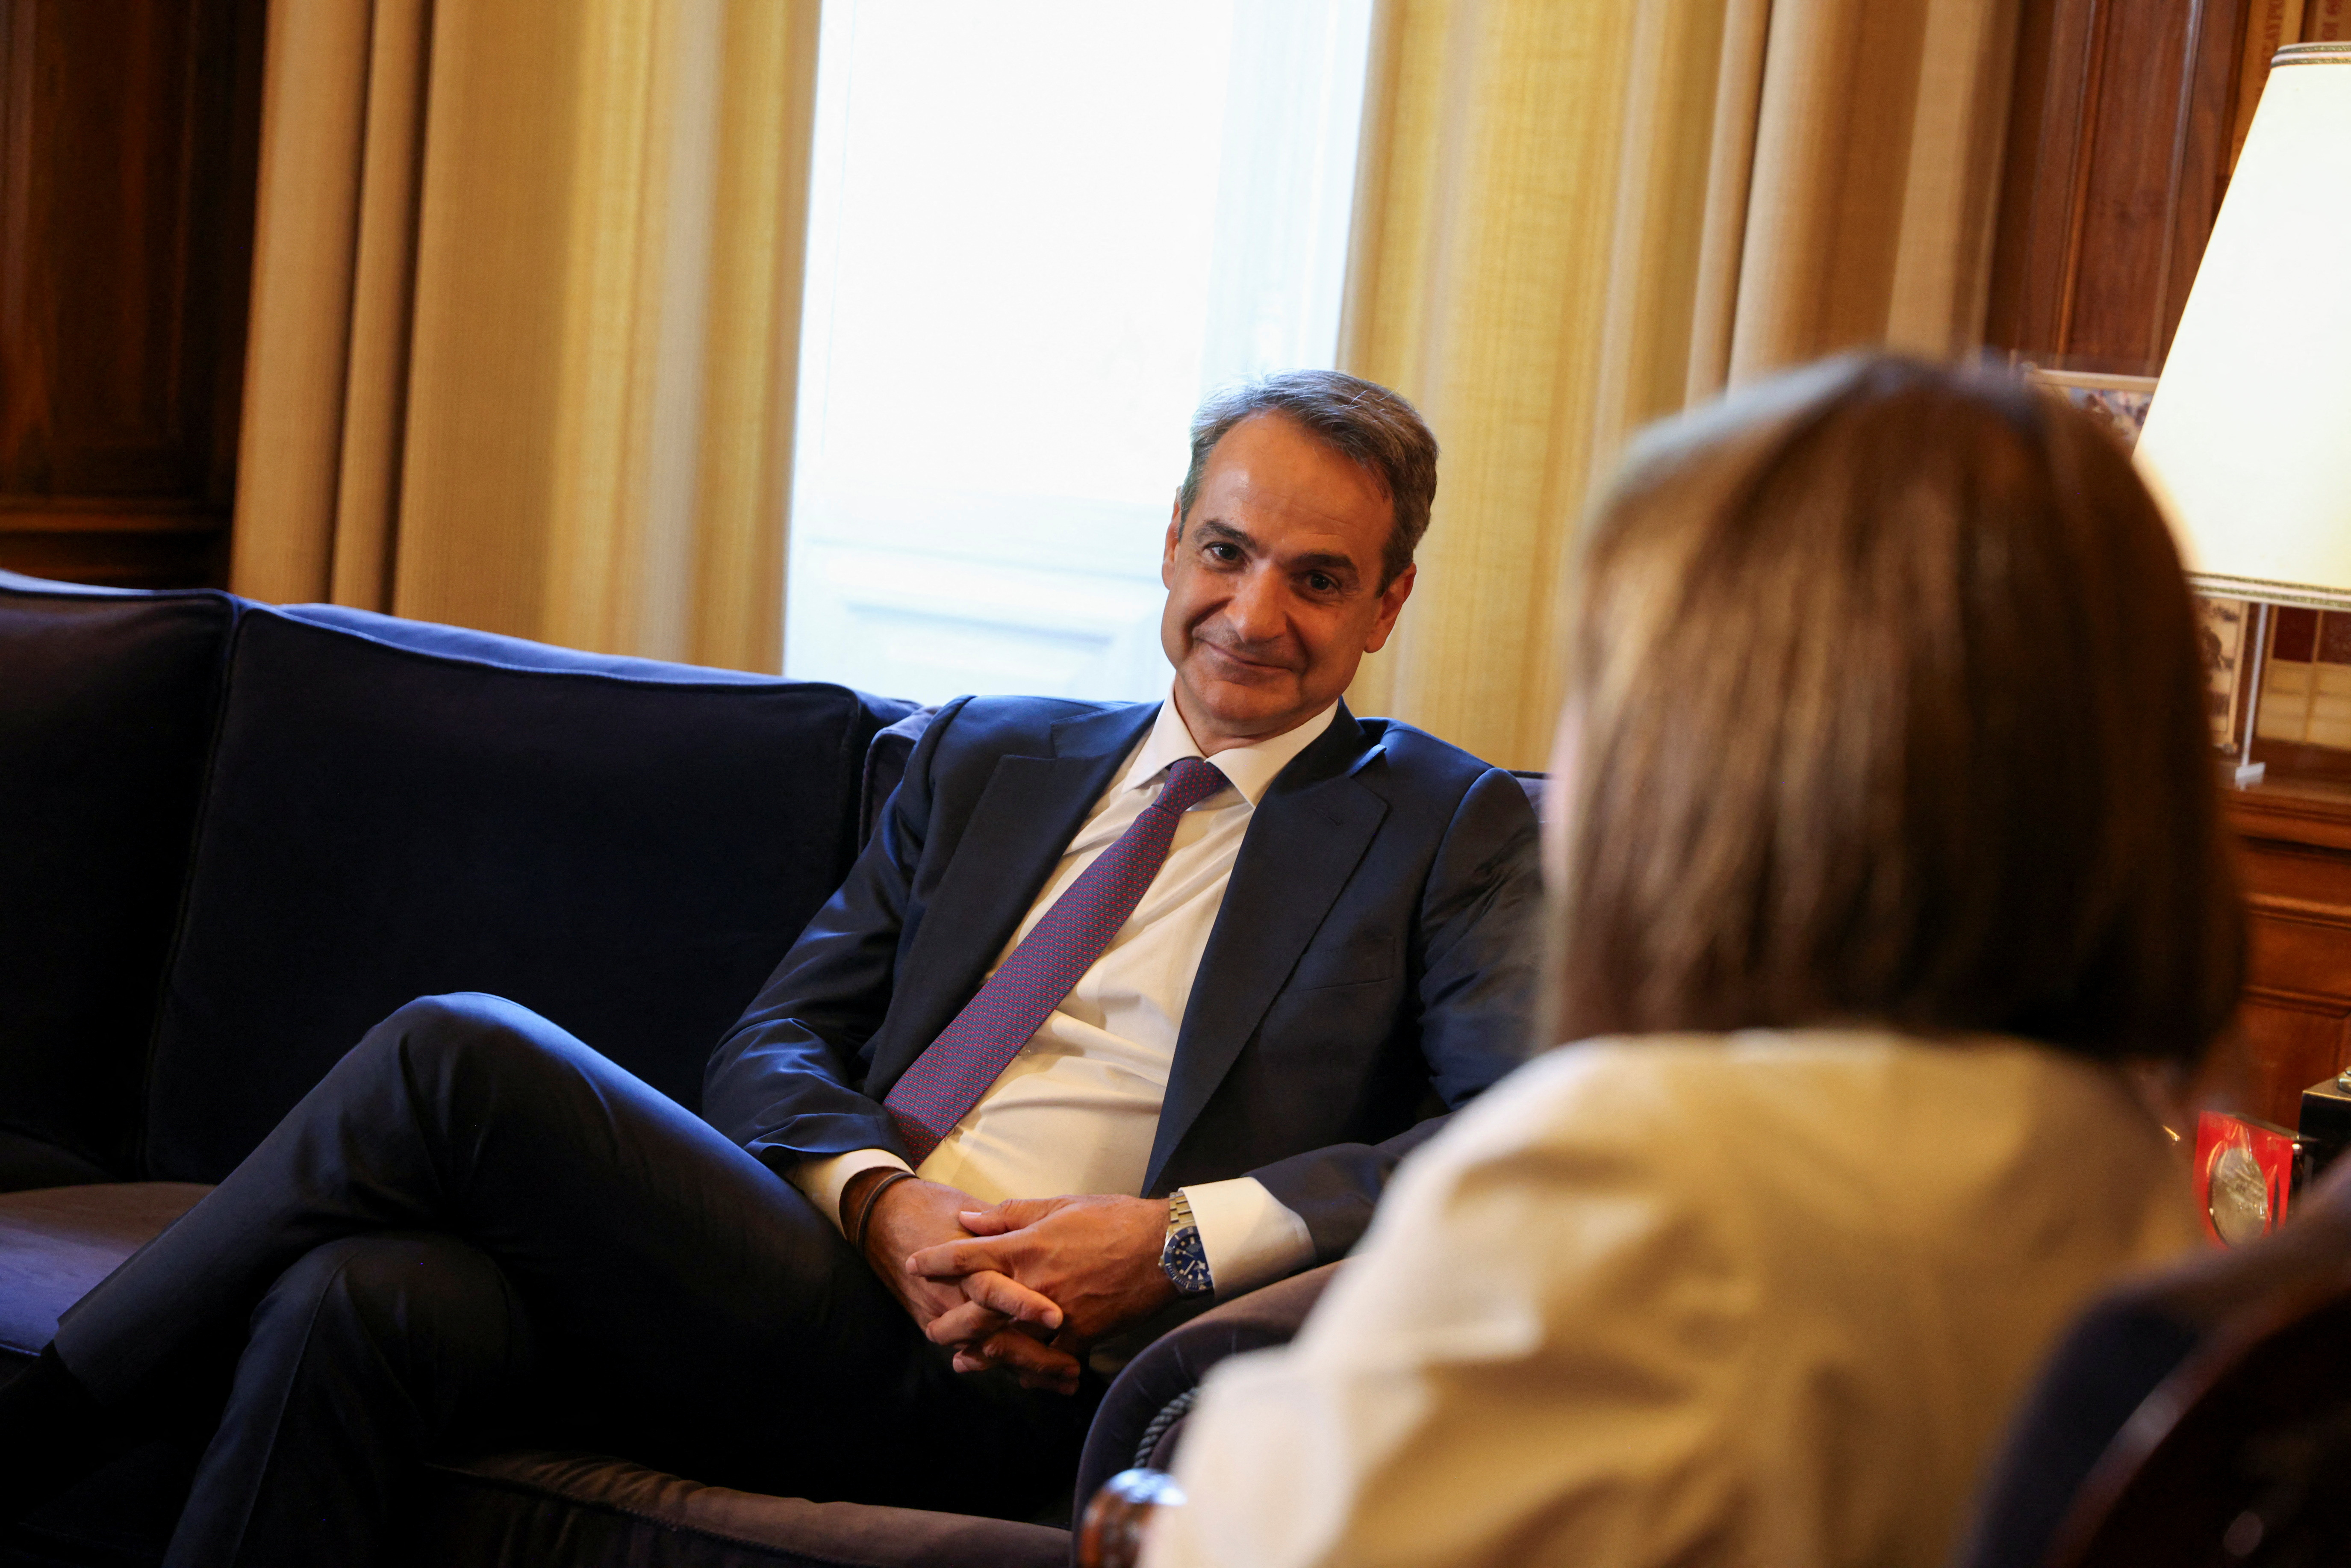 Newly elected Greek Prime Minister Mitsotakis to be handed mandate from Greek President, in Athens